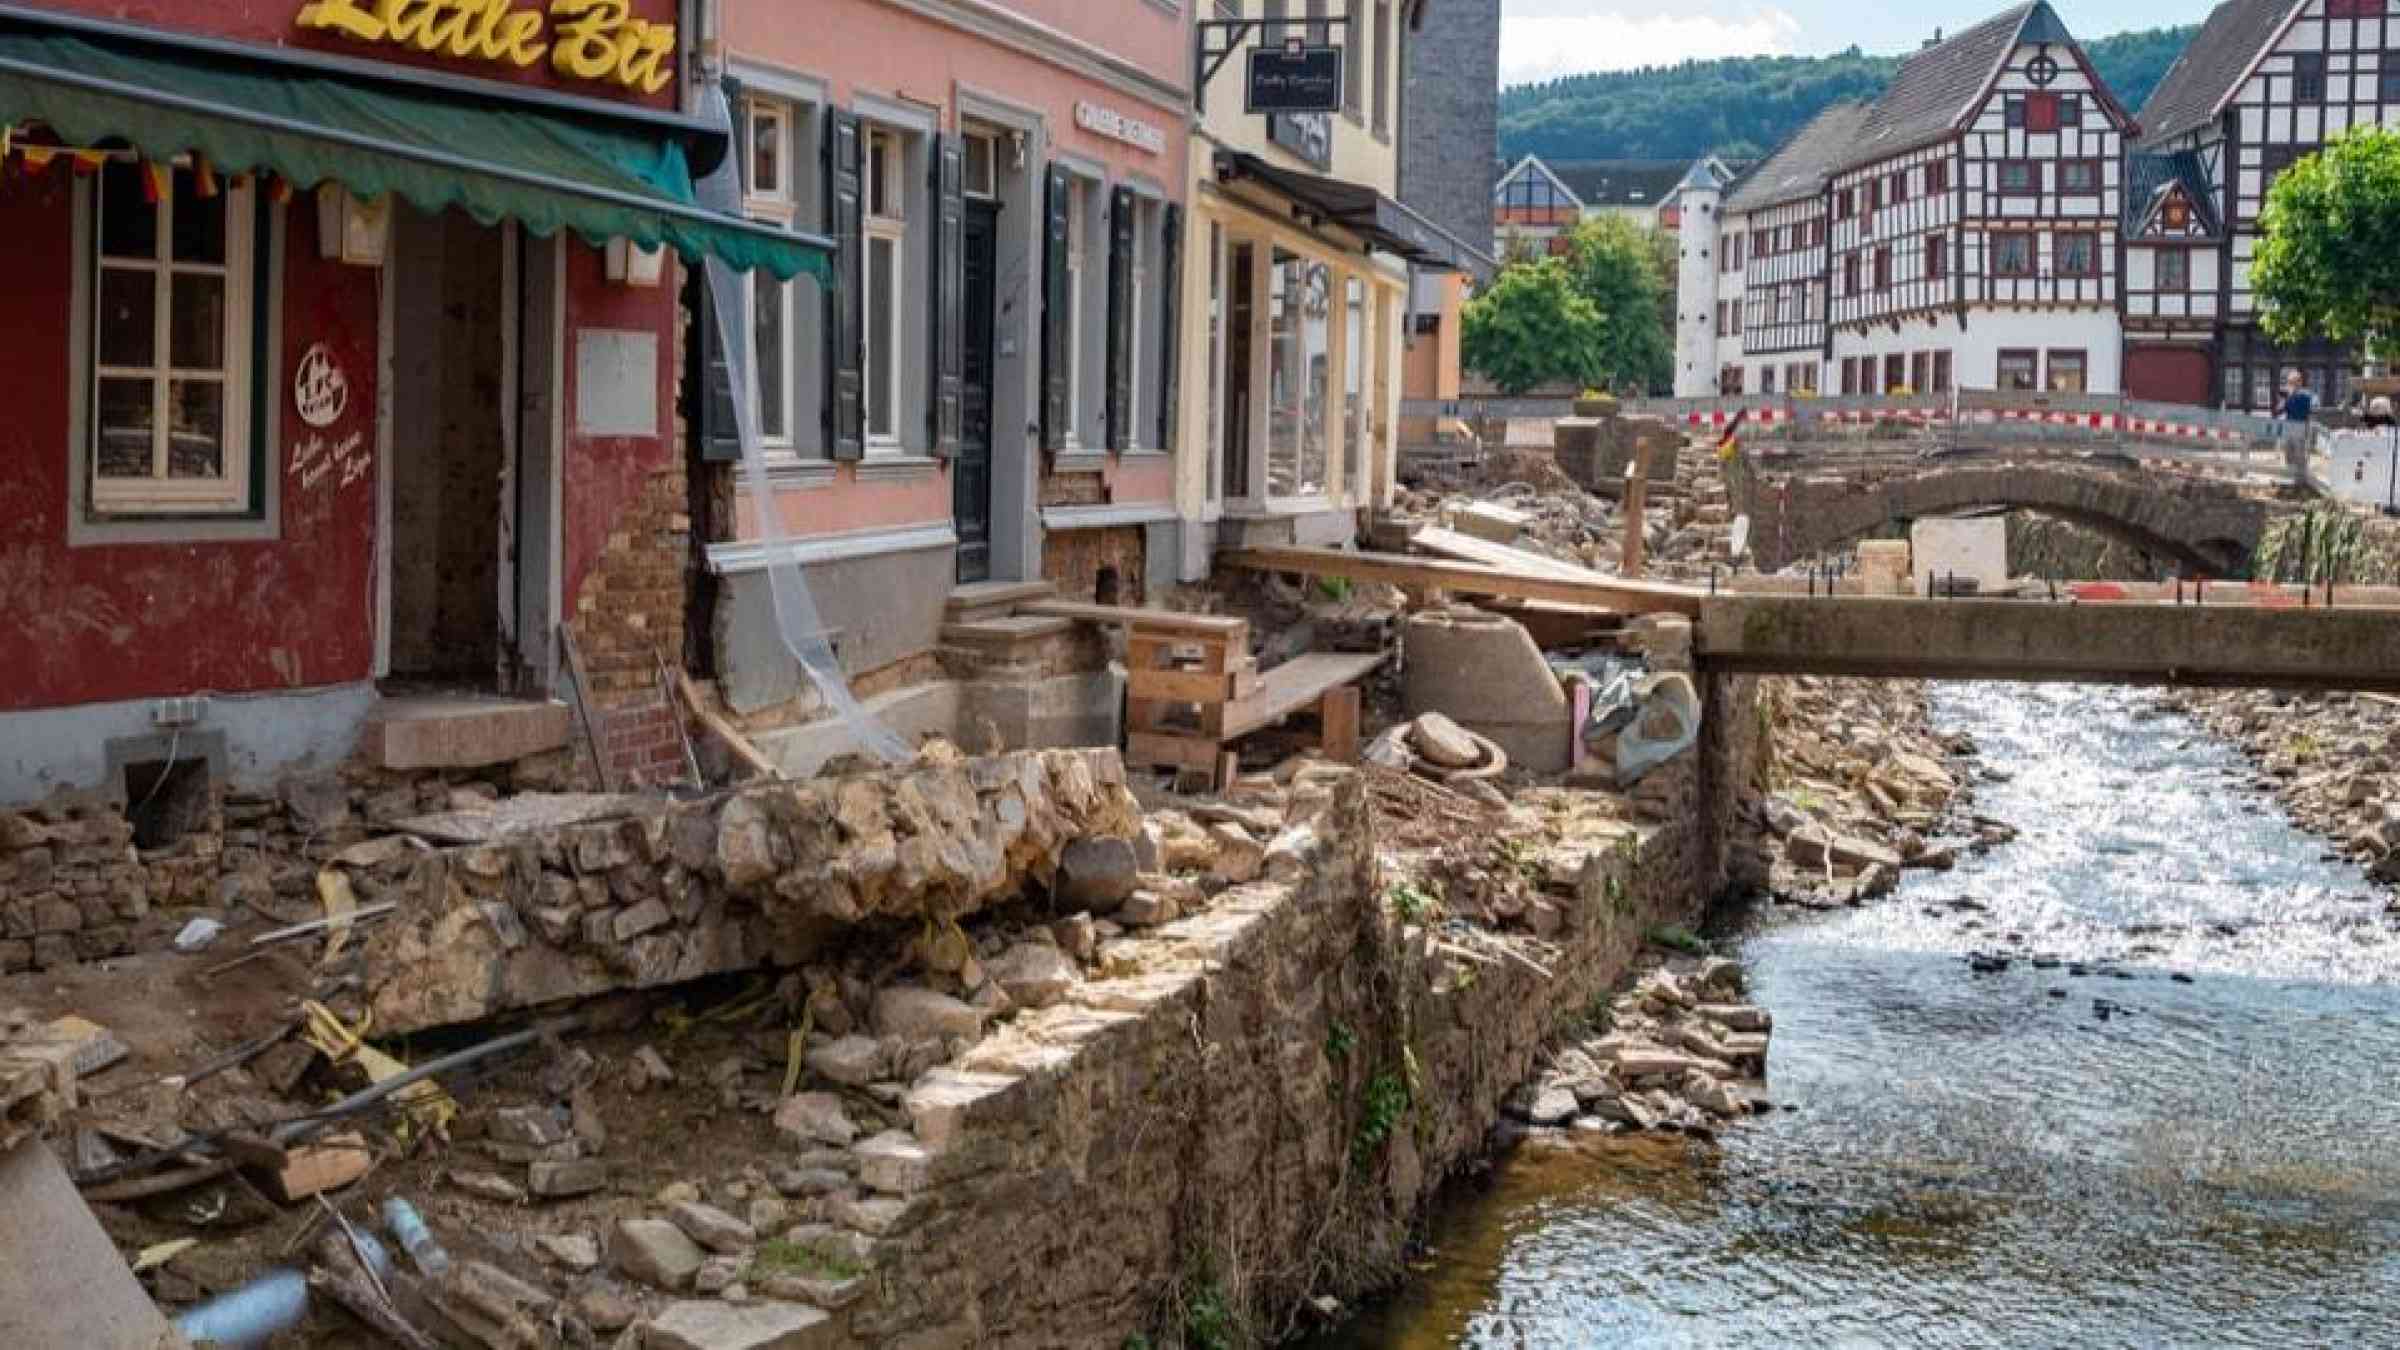 River bed and destroyed village after the July 2021 floods in Germany